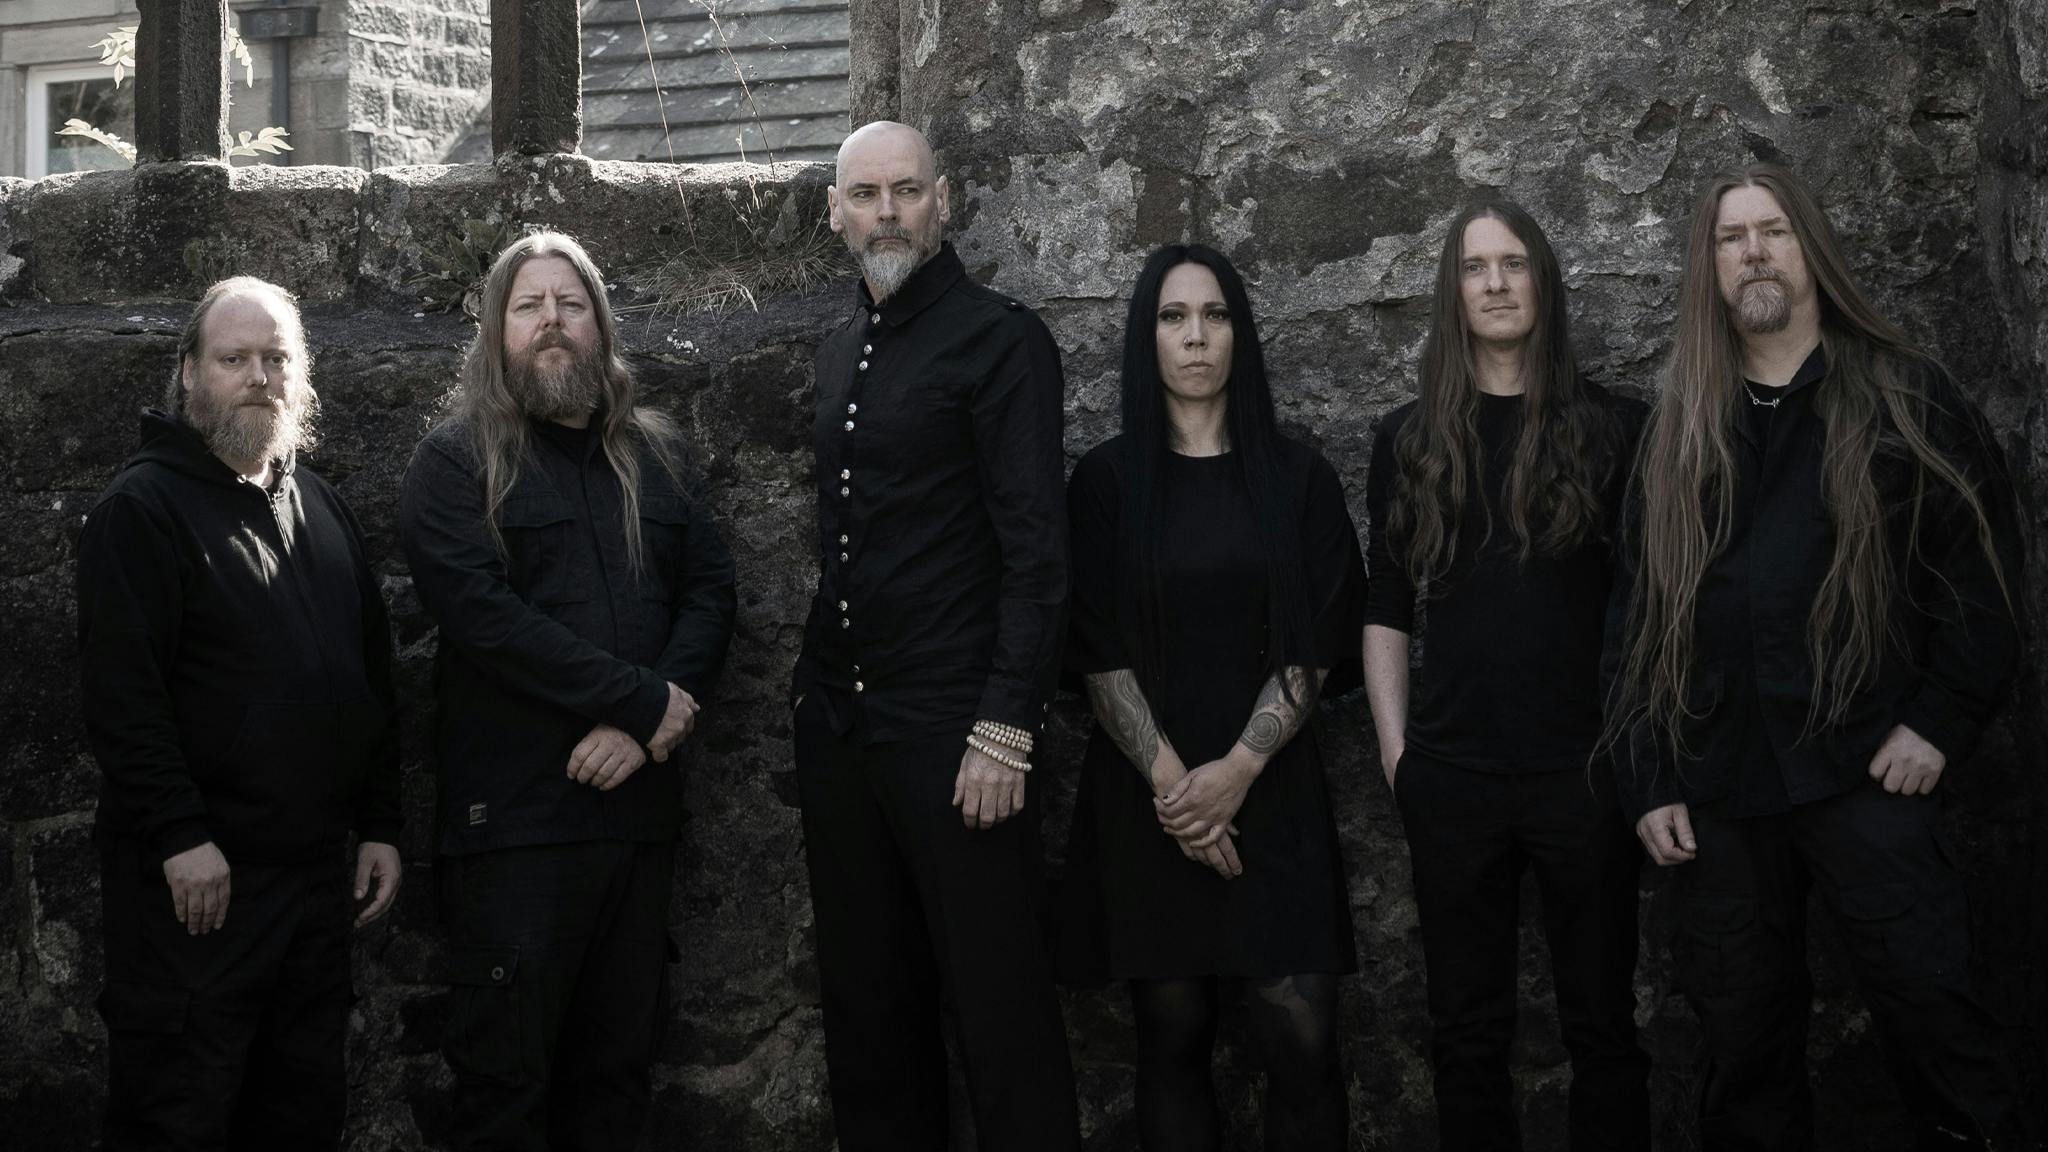 My Dying Bride post honest statement about unresolved “fractures within the band”